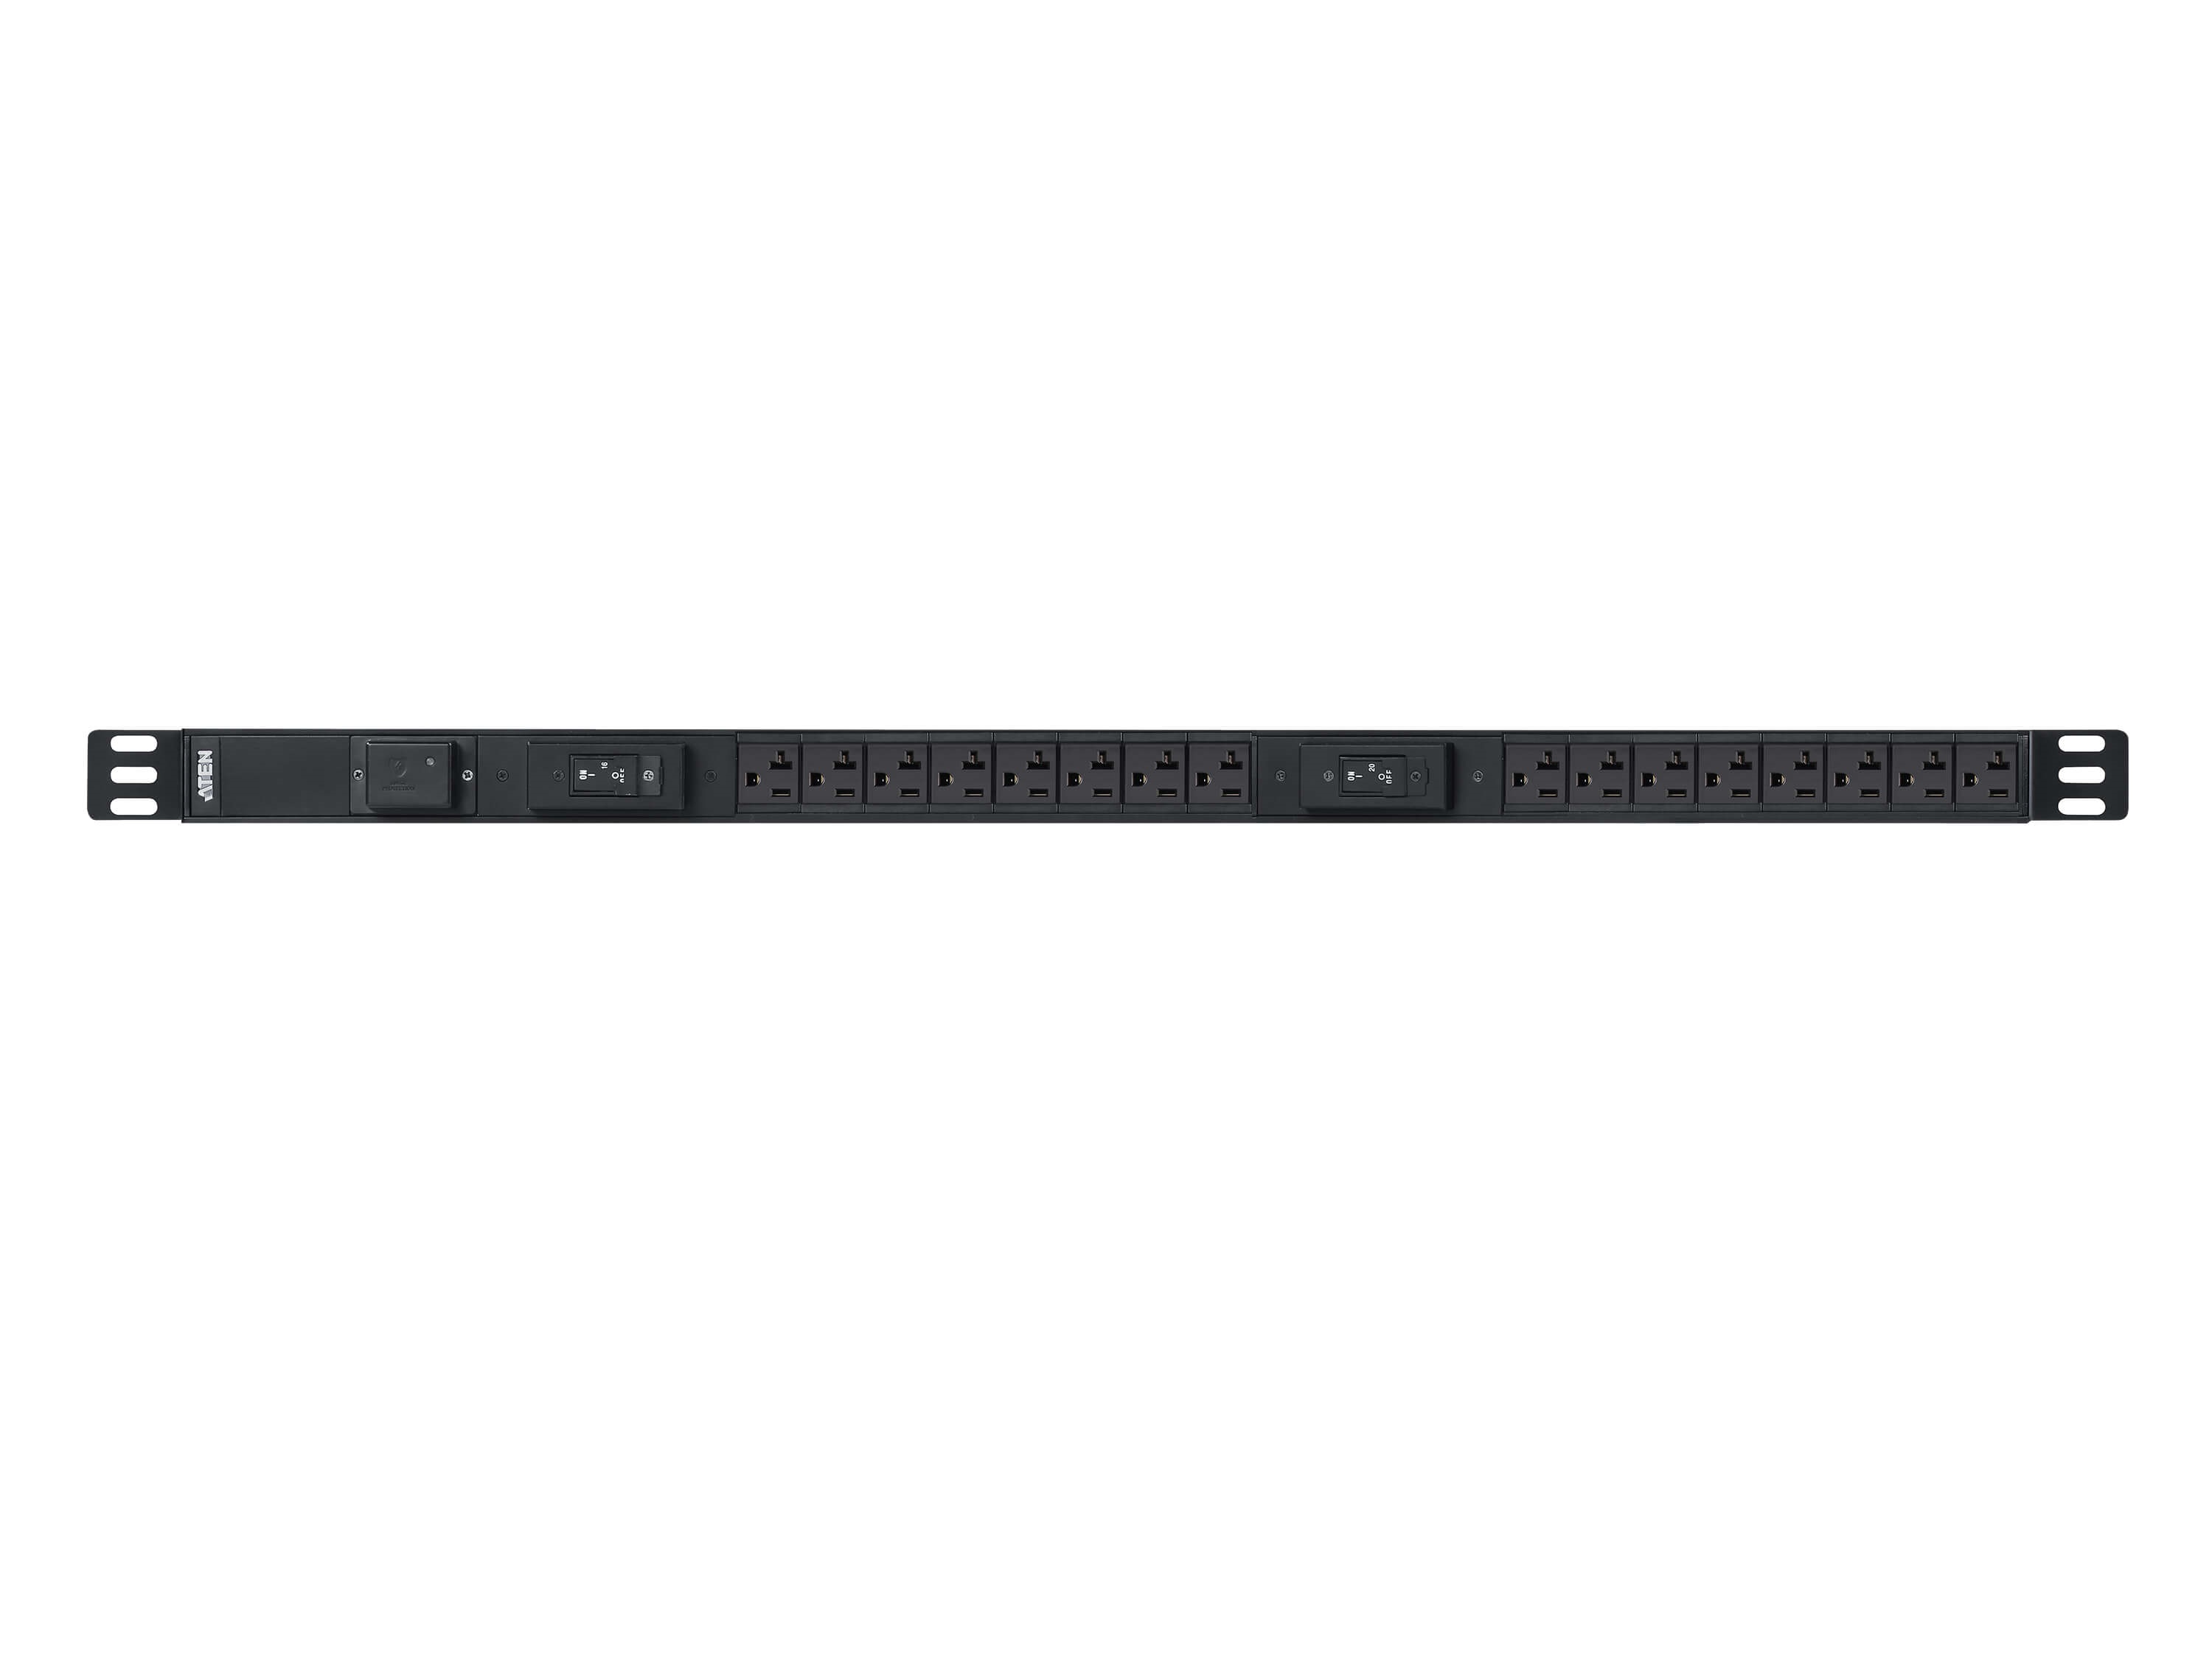 PE0316SA Basic PDU with Surge Protection/100-120 VAC/30A Max by Aten